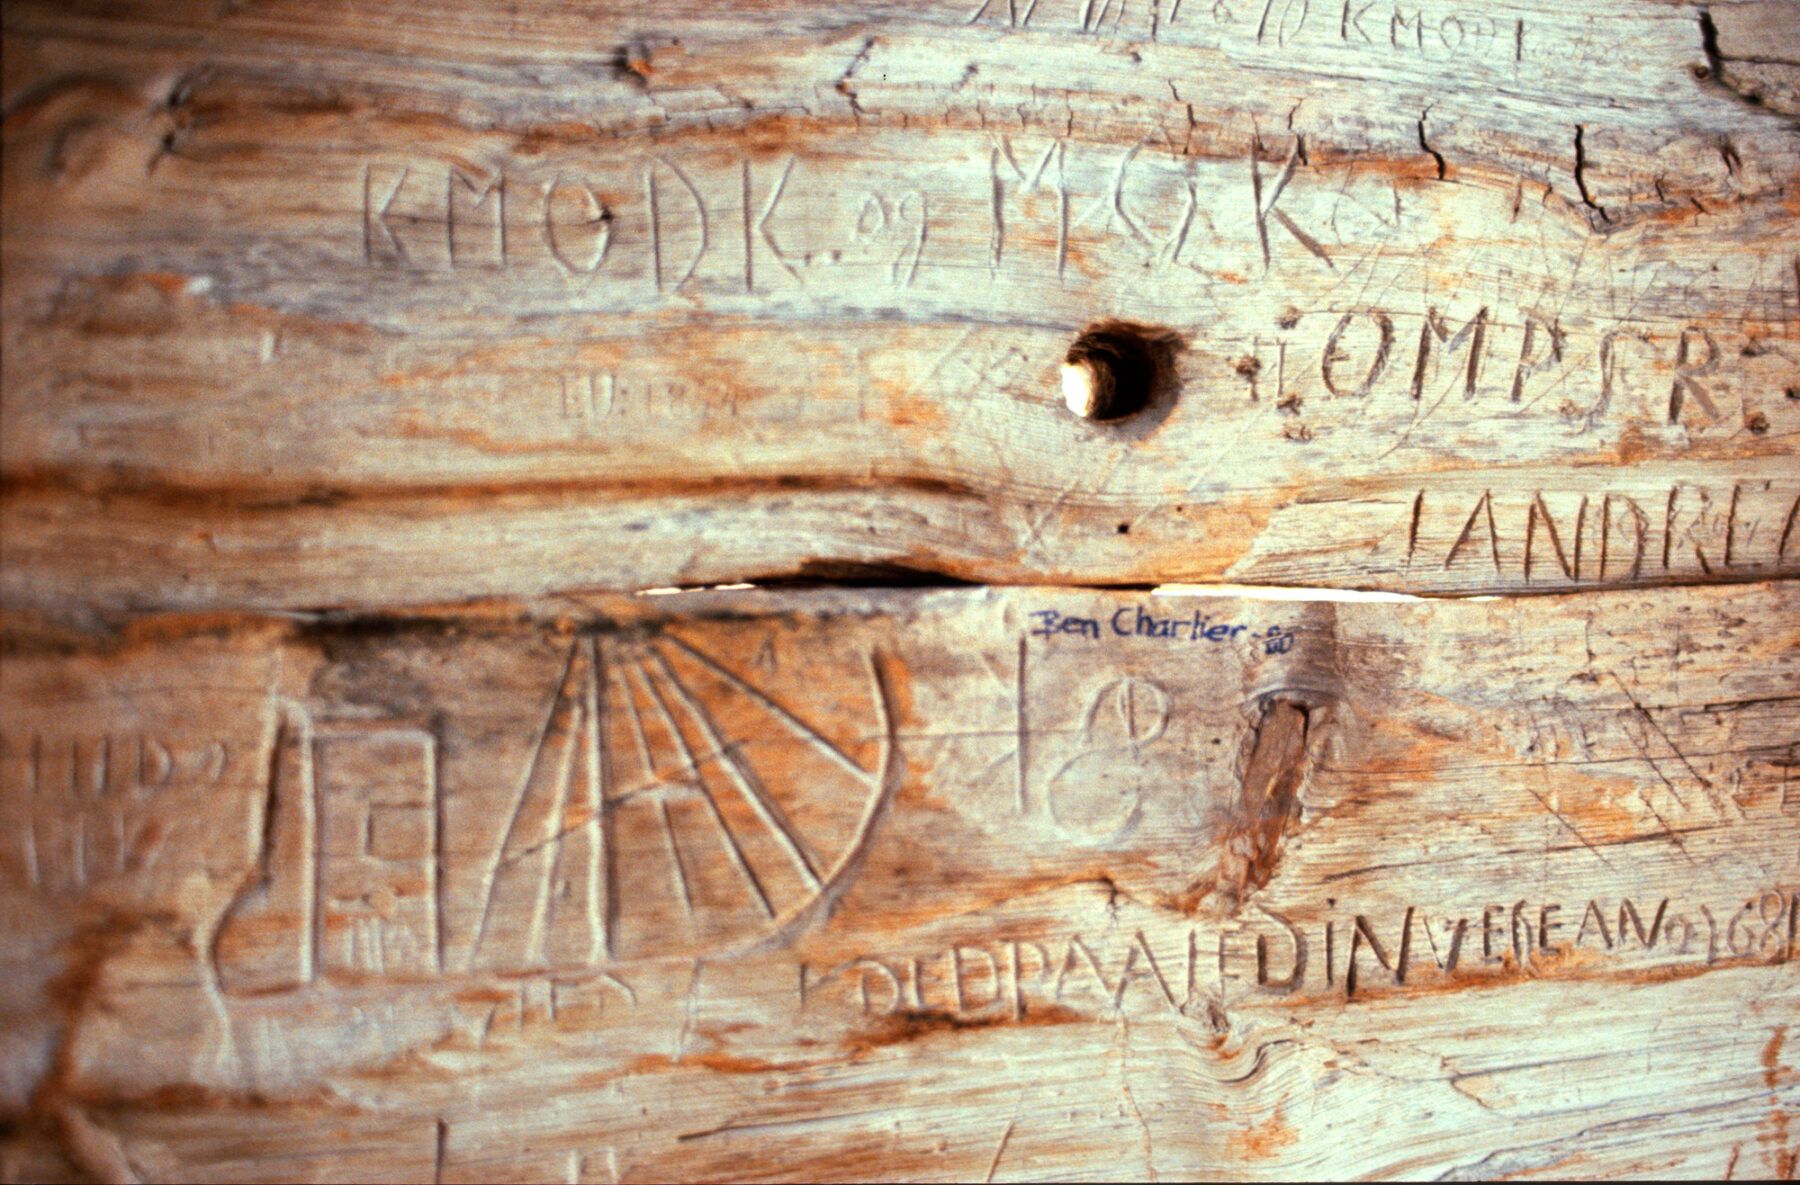 Many of the visitors to the hut left behind inscriptions on the walls